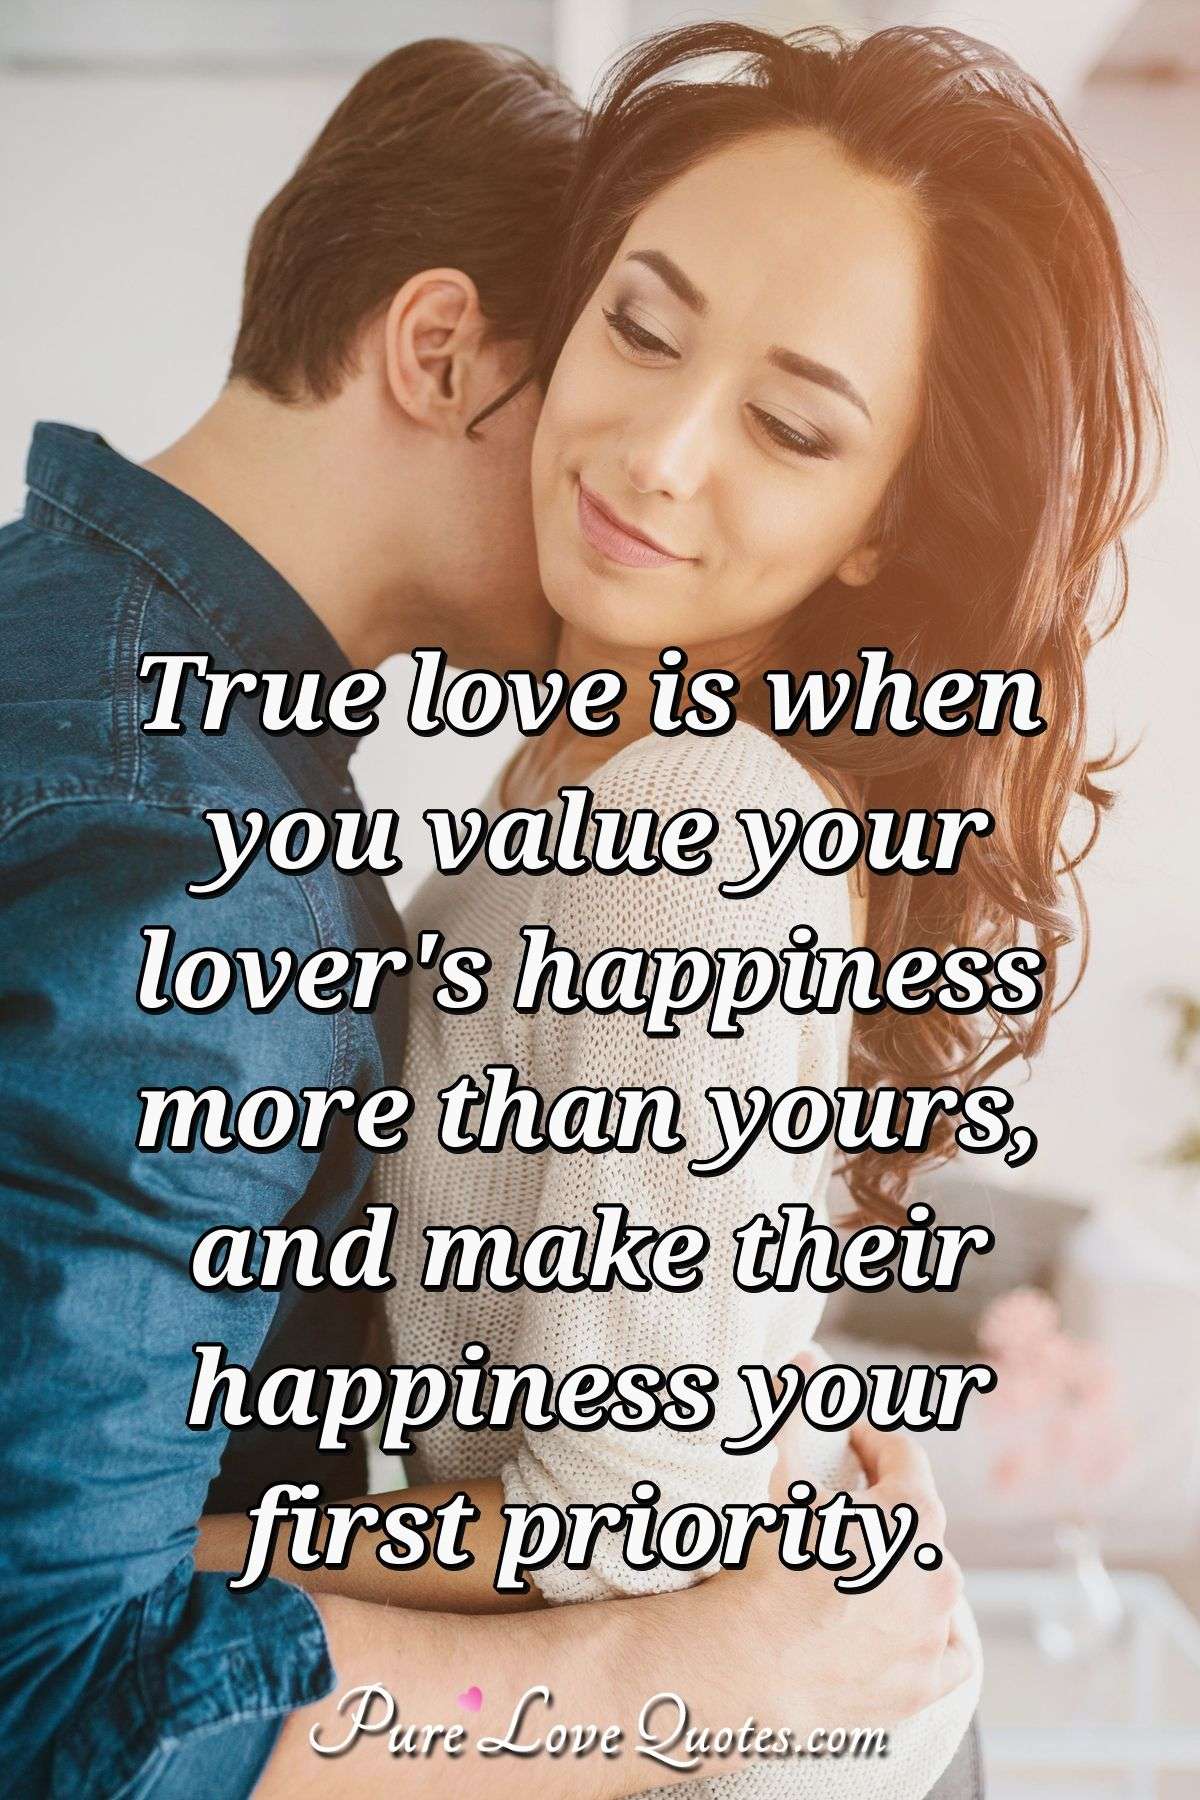 True love is when you value your lover's happiness more than yours, and make their happiness your first priority. - Anonymous